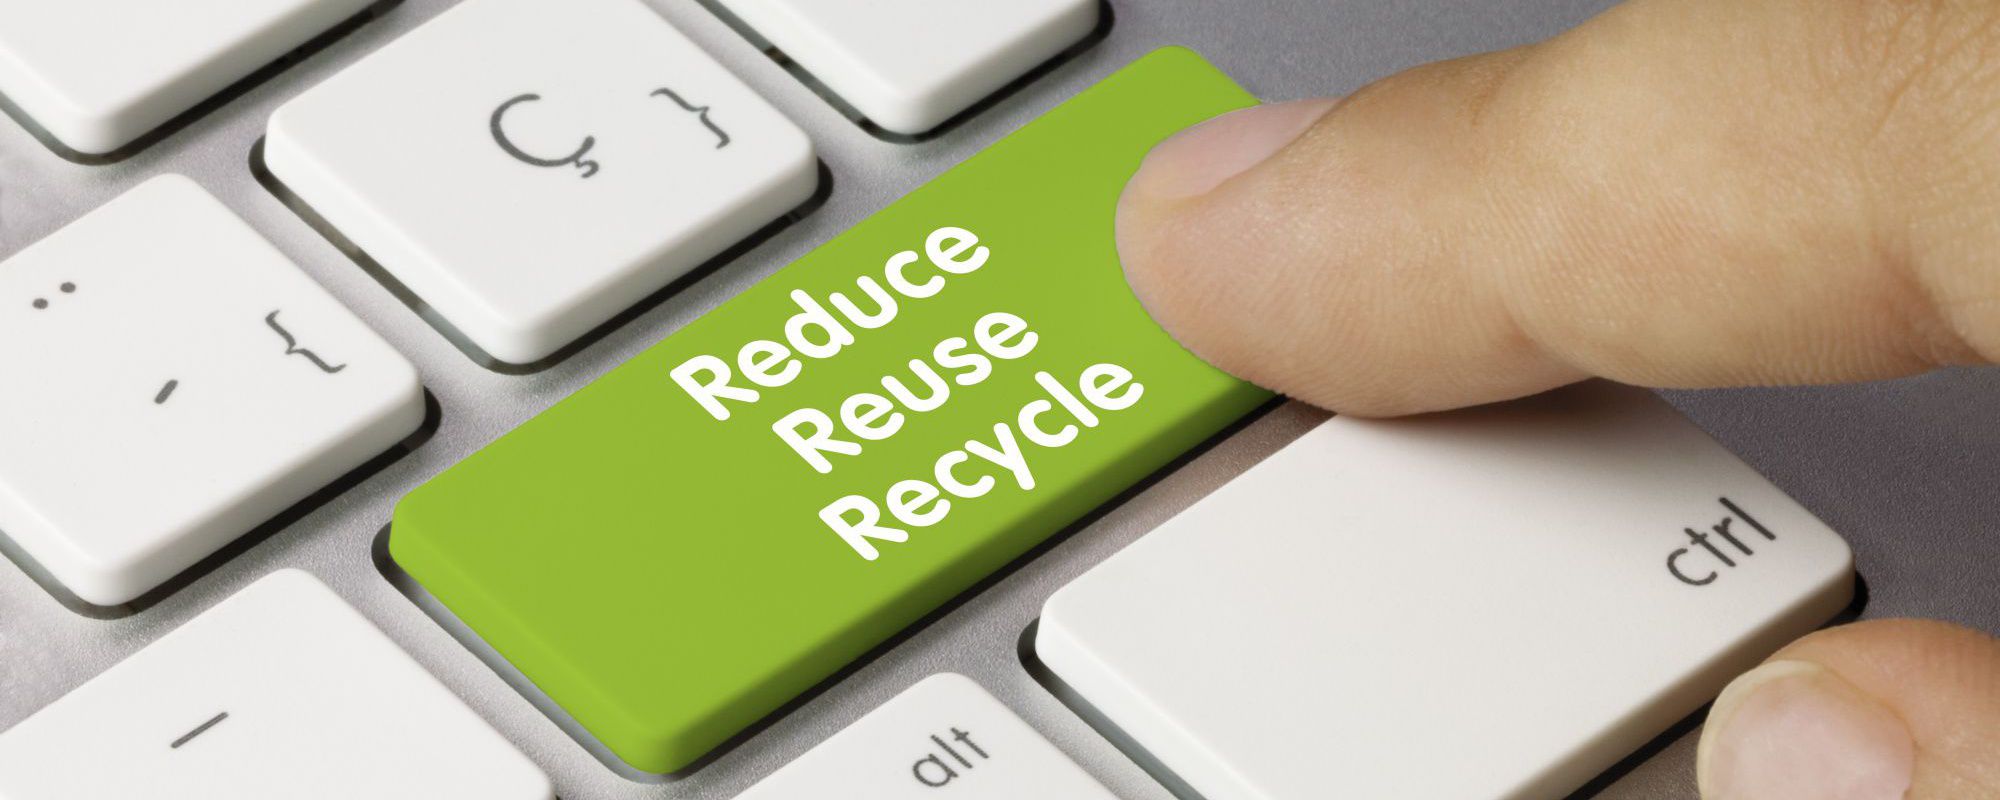 reduce reuse recycle button on keyboard